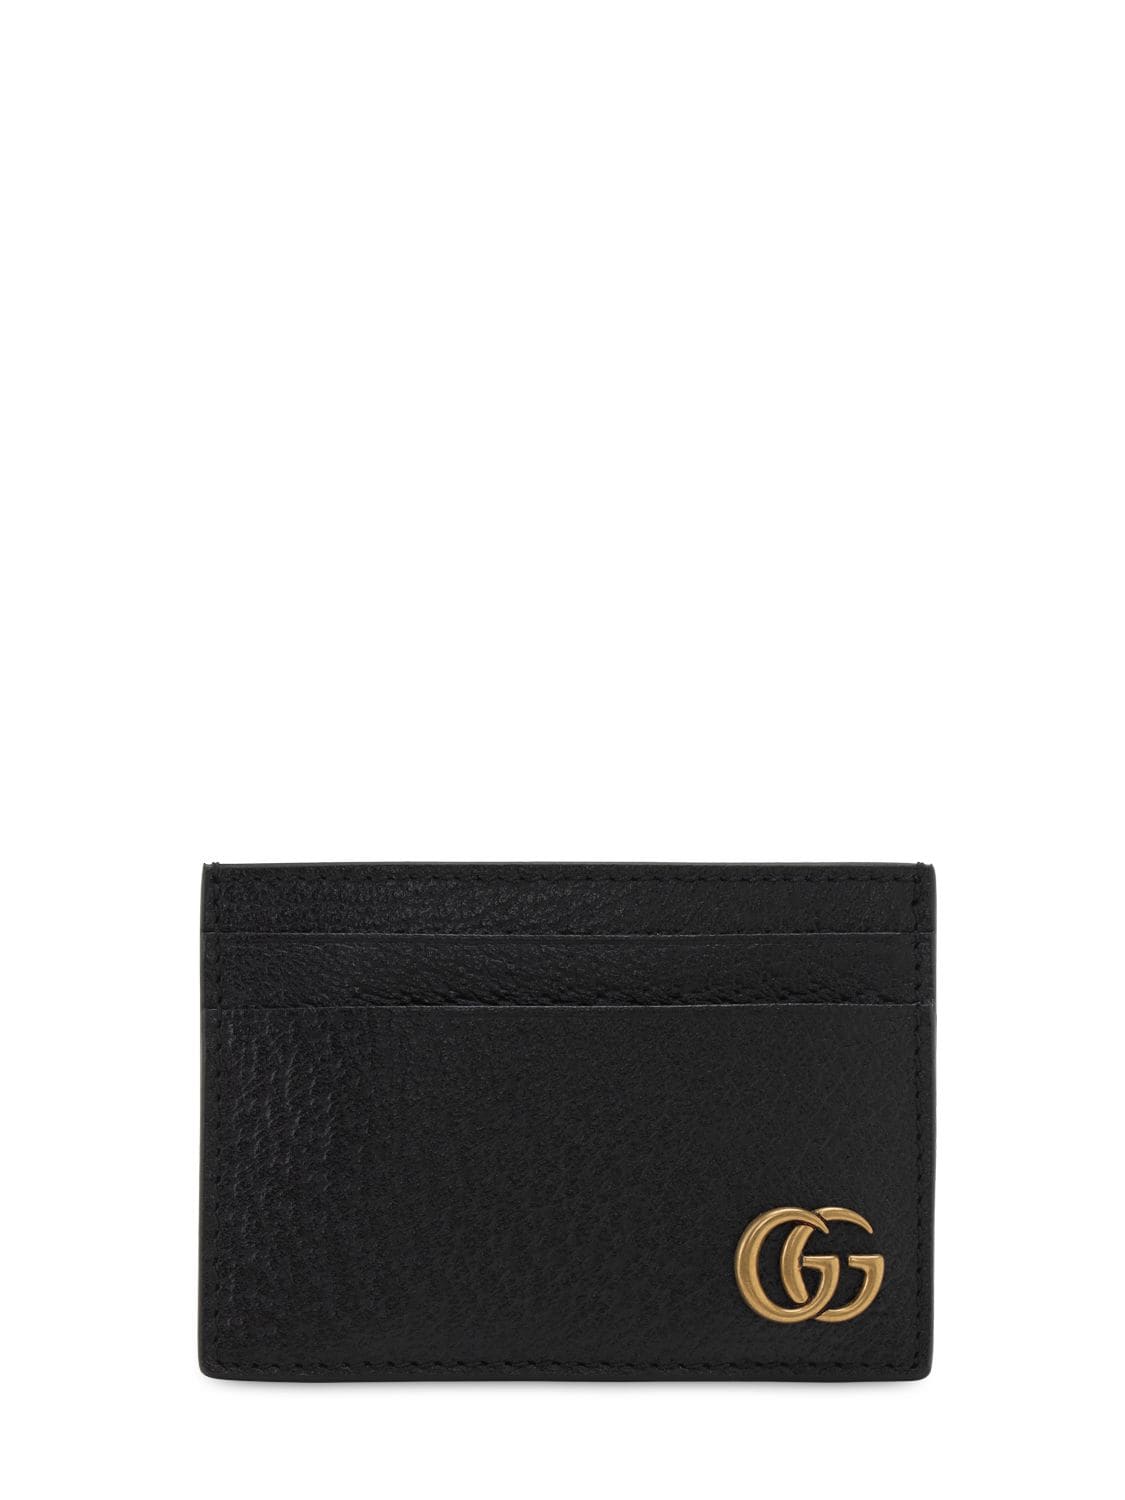 Gucci Logo Leather Money Clip Card Holder In Black